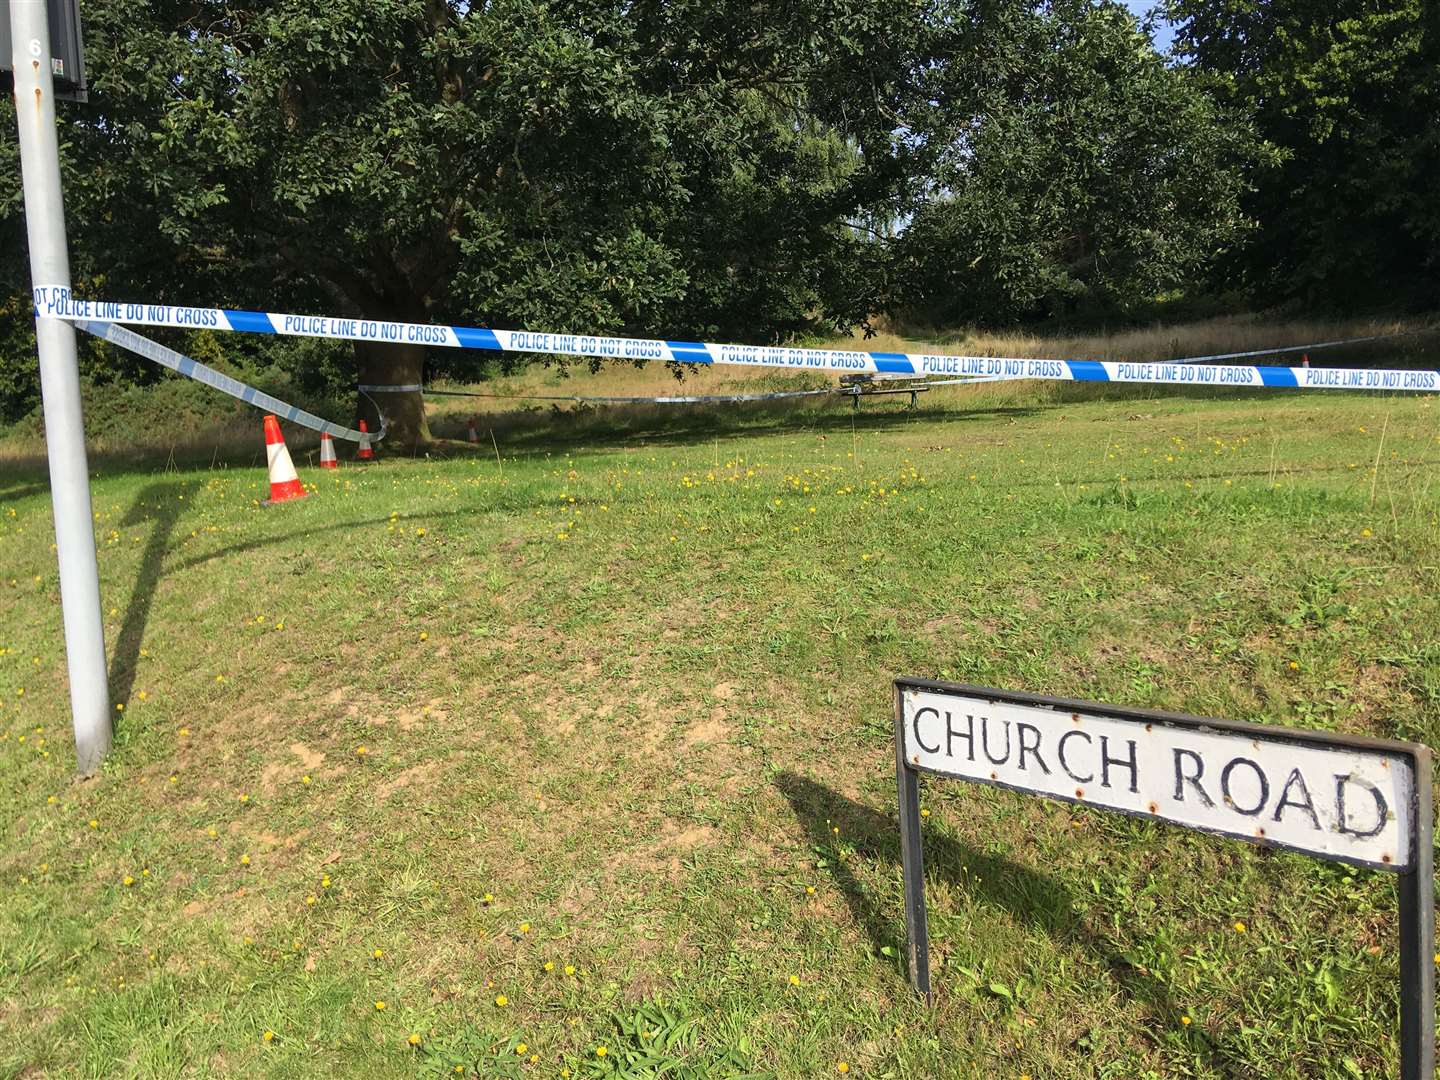 Police were in Church Road, Tunbridge Wells for several days